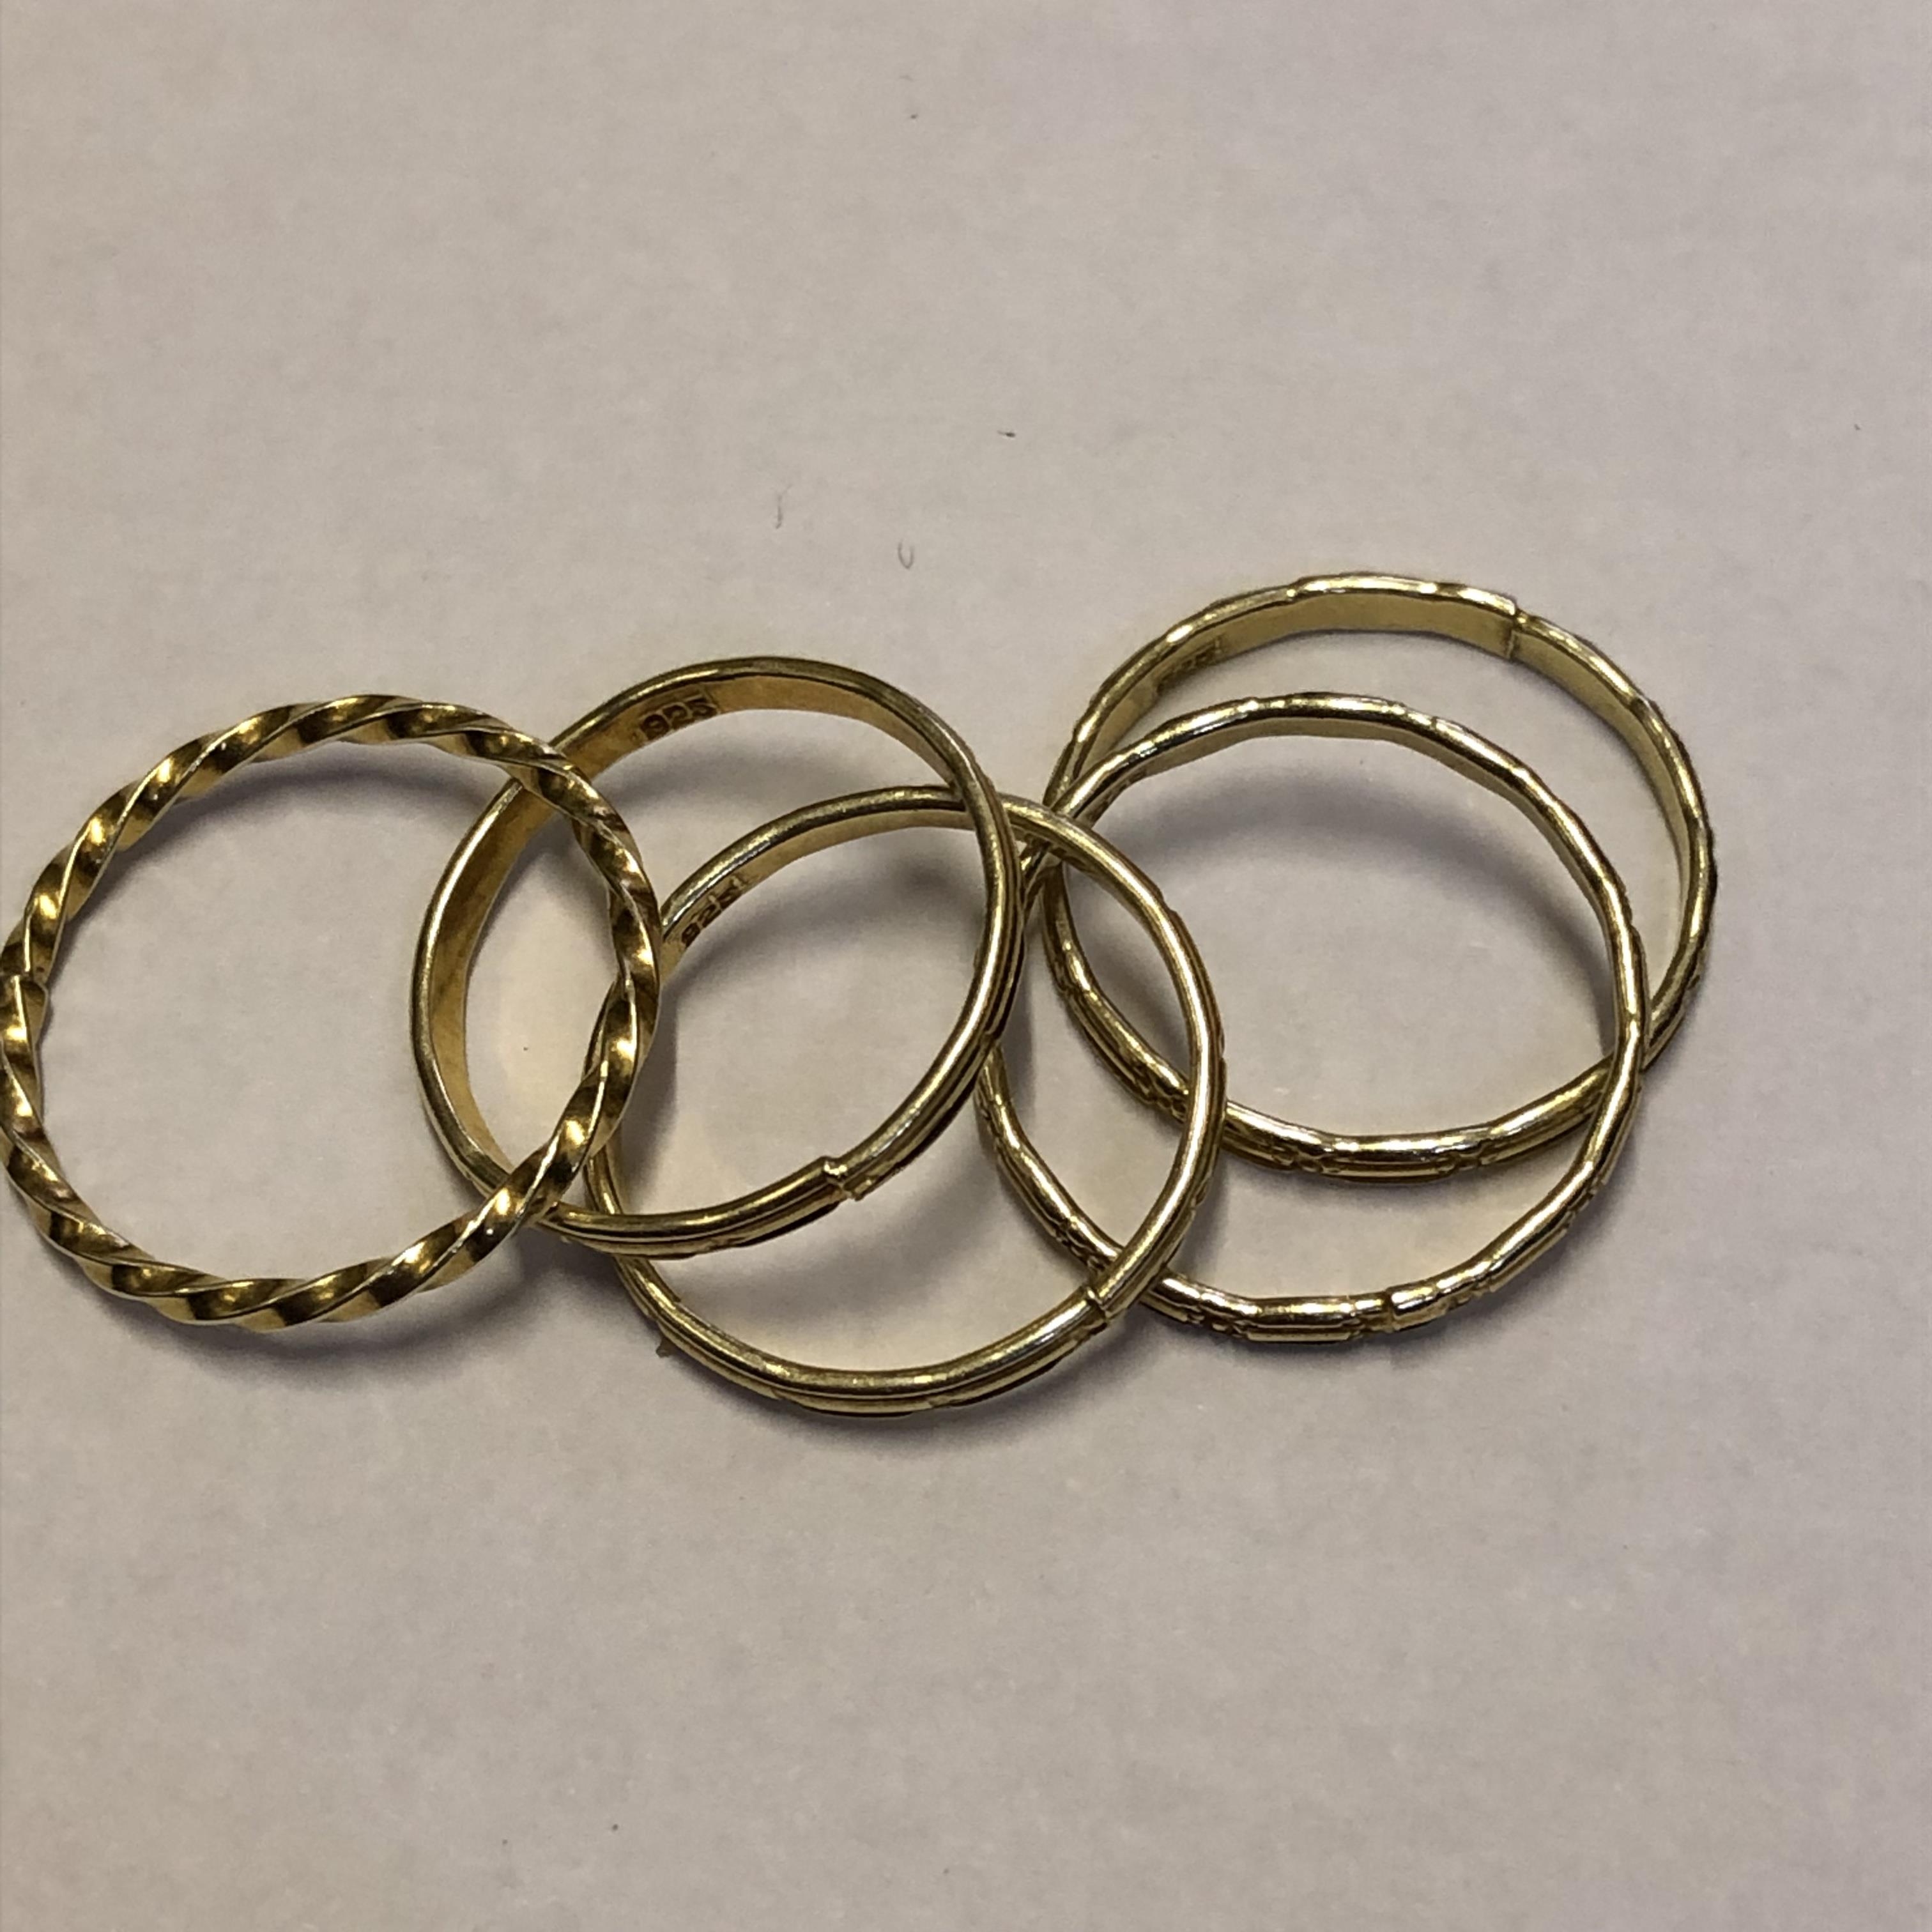 FIVE 925 STAMPED GOLD PLATED BANDS VARIOUS SIZES 4. - Image 4 of 5